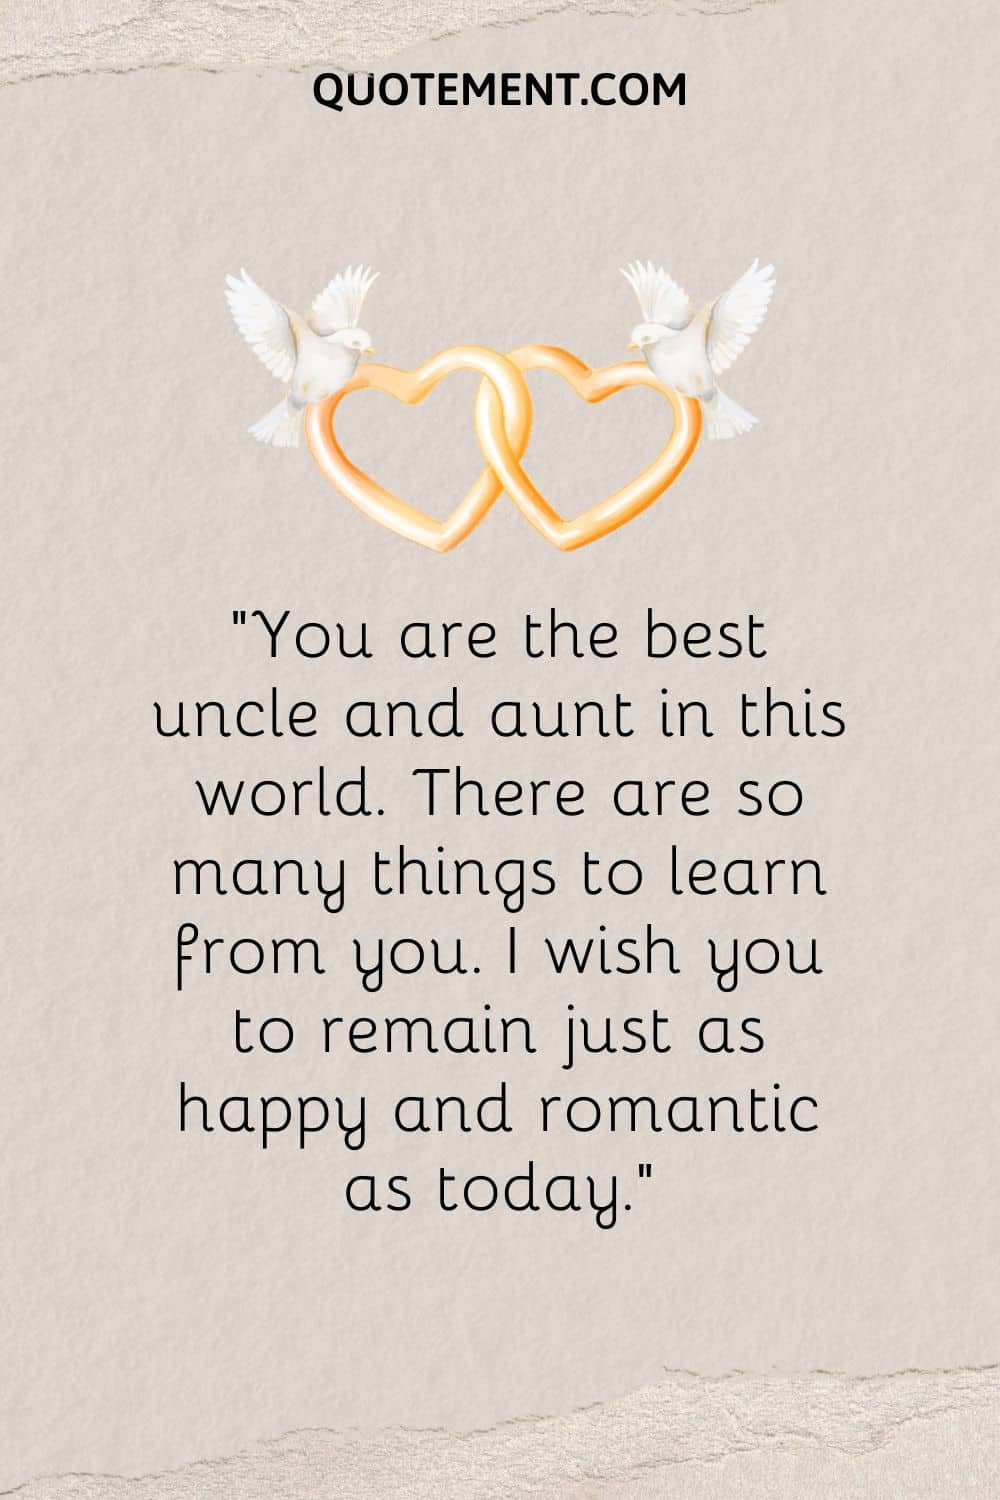 You are the best uncle and aunt in this world